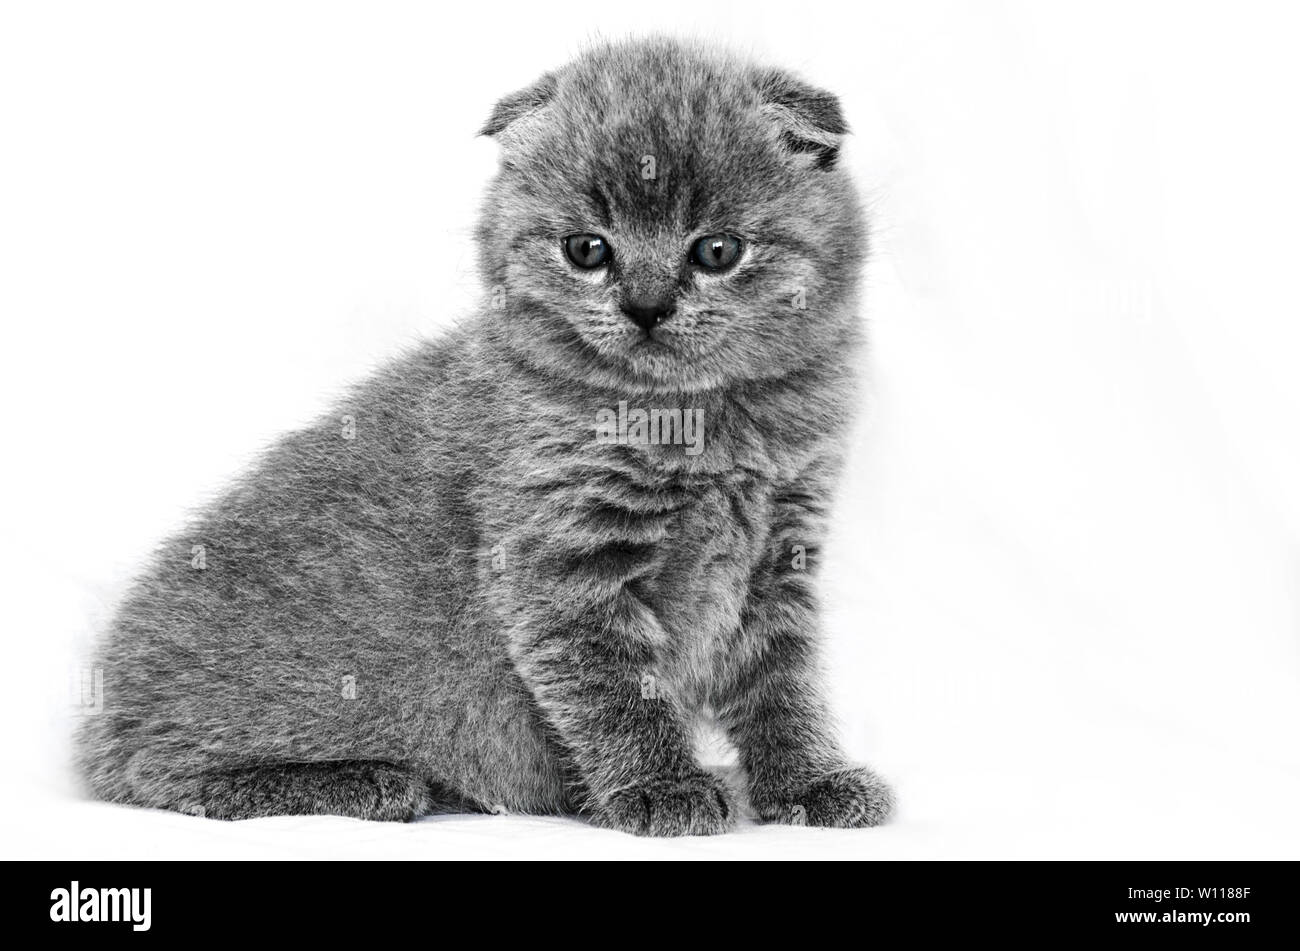 Small british kitten on a white background the age of 1 month Stock Photo